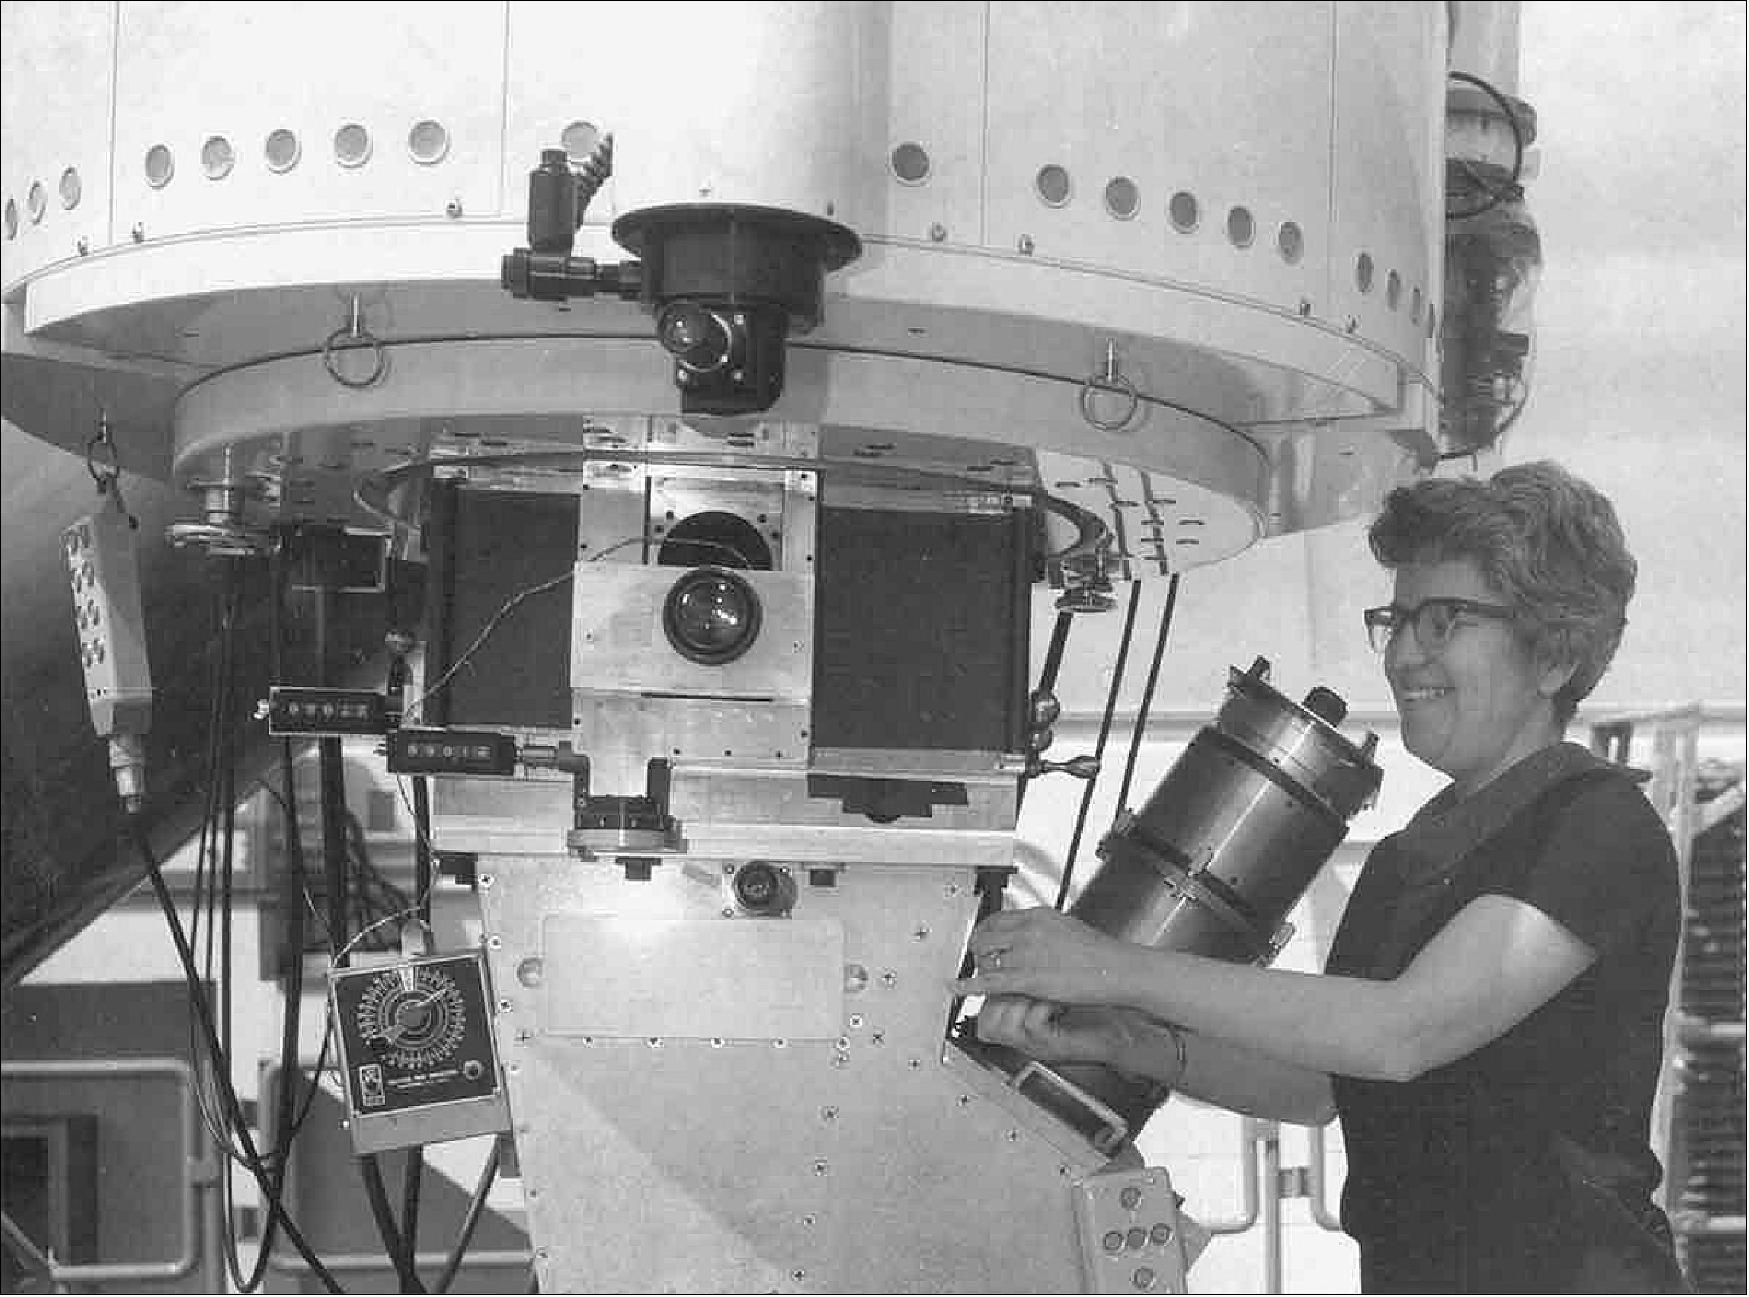 Figure 5: The NSF Vera C. Rubin Observatory will significantly advance what we know about dark matter and dark energy. Rubin provided important evidence of the existence of dark matter. Here, she is shown operating the 2.1-meter telescope at NSF's Kitt Peak National Observatory (image credit: NOAO/AURA/NSF)